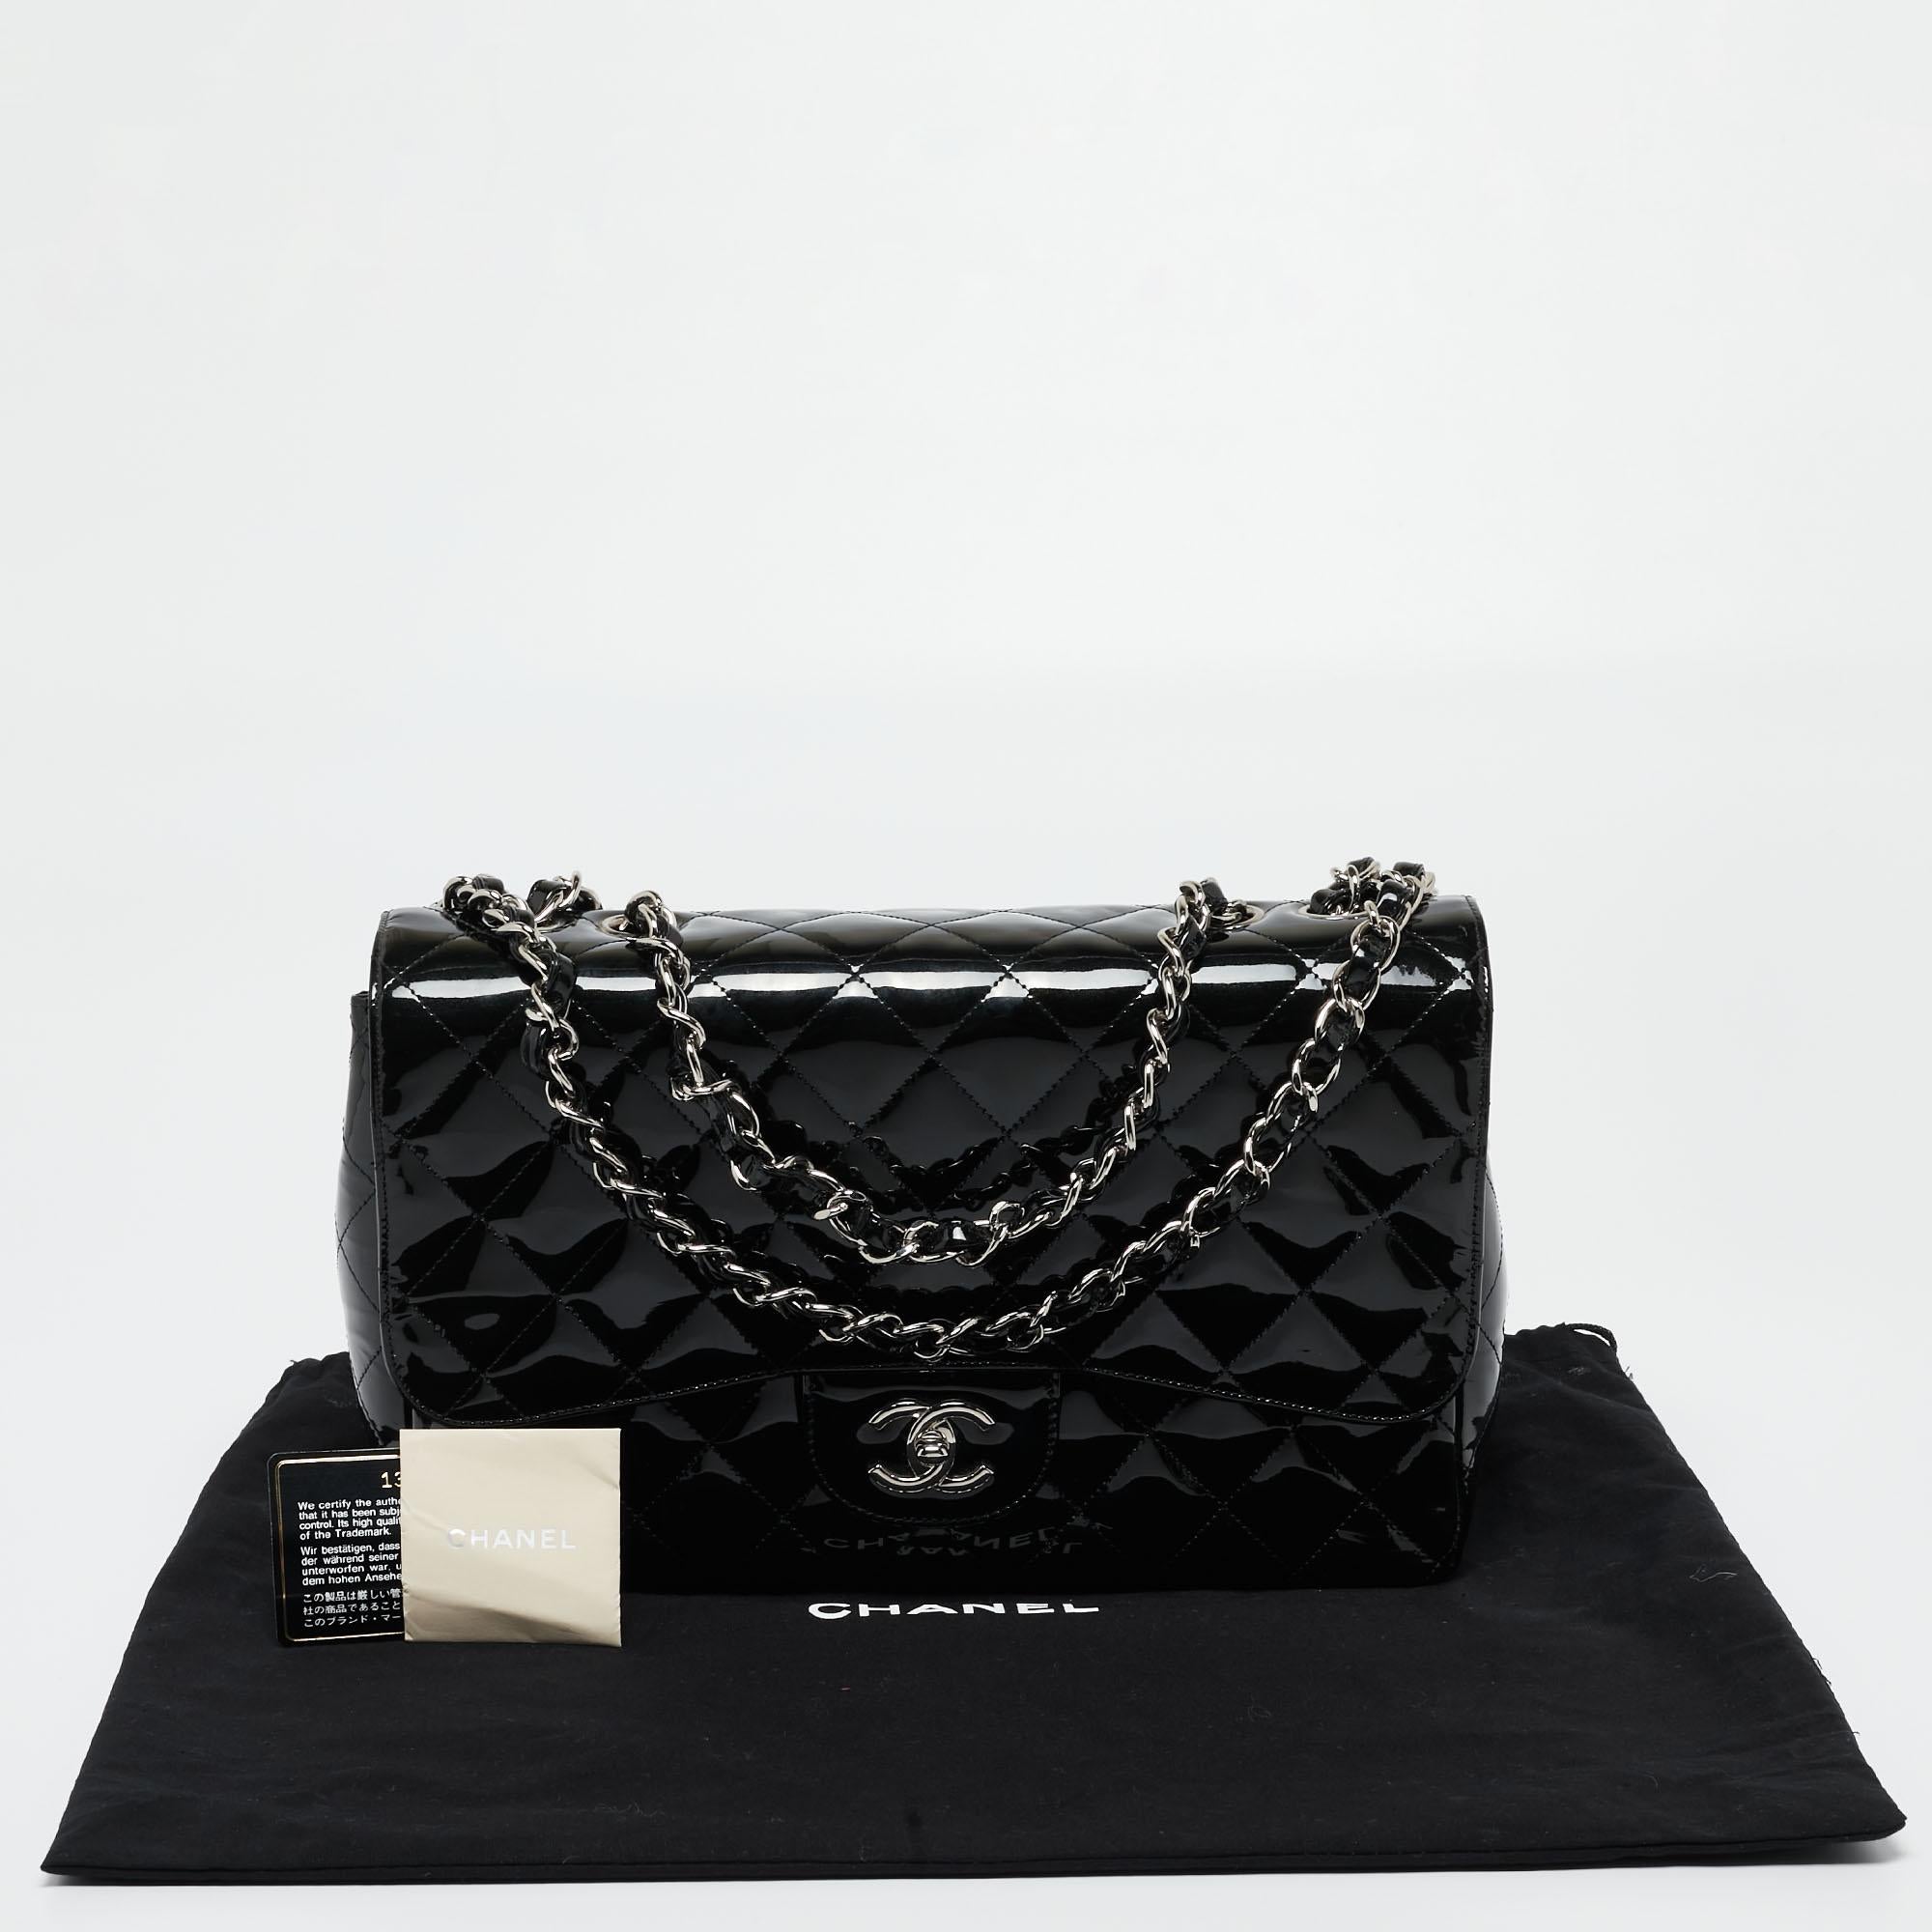 Chanel Metallic Black Quilted Patent Leather Jumbo Classic Single Flap Bag 10